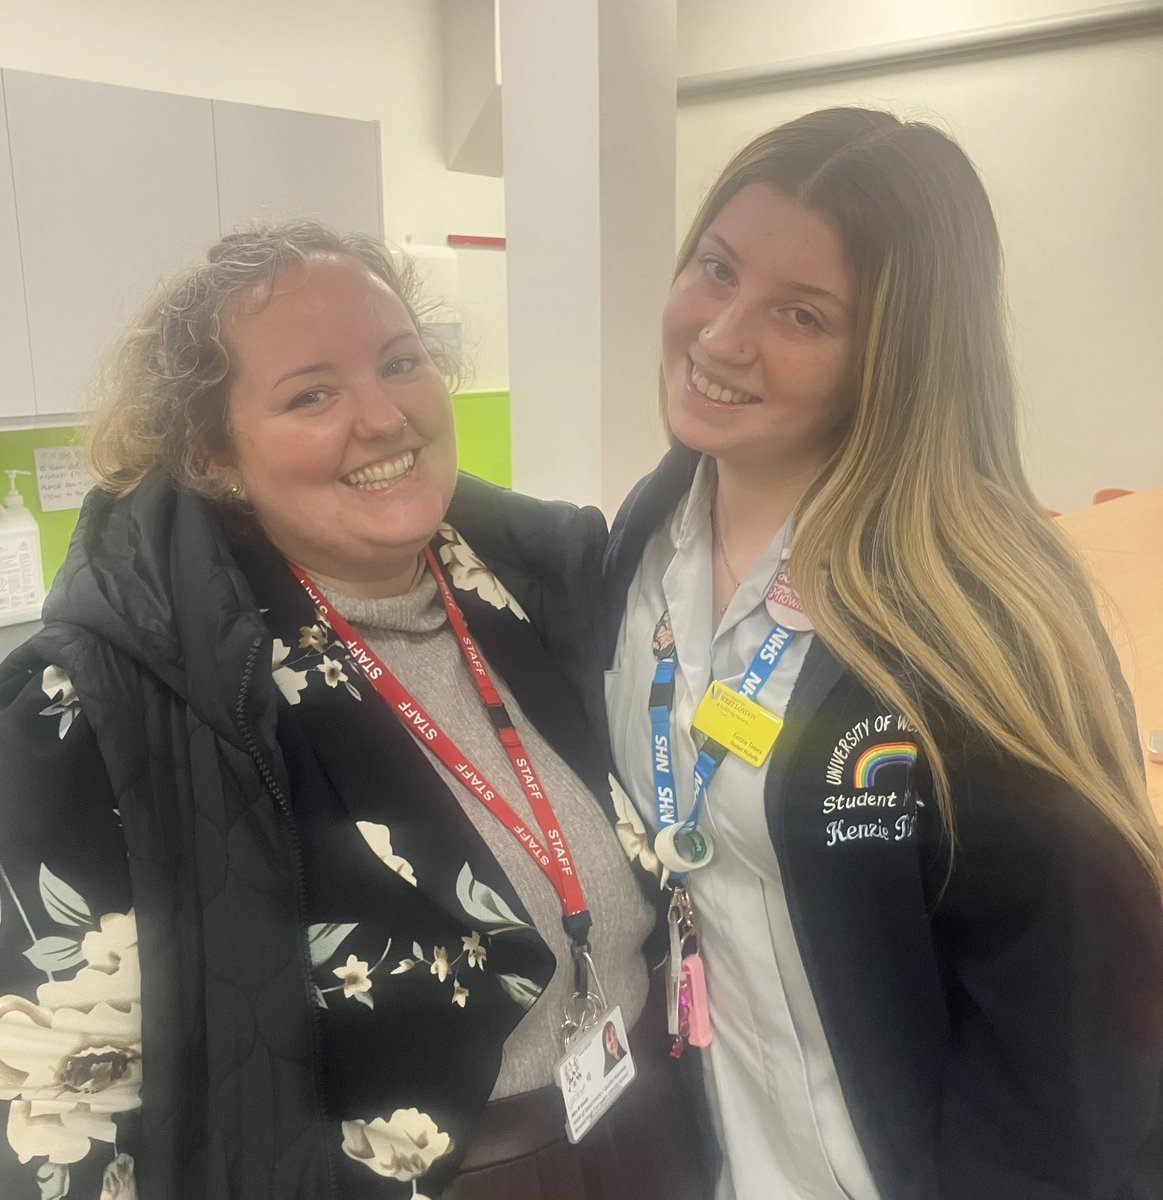 Always great to welcome back @bhfcs #alummi 🤗 Today, the fabulous @kenzietimms_ came@to talk to #bteclevel3 #healthandsocialcare #sixthformers about life as a #studentmidwife @uniwestlondon #nihilnisideo #careers #sixthform #welcomeback #proud